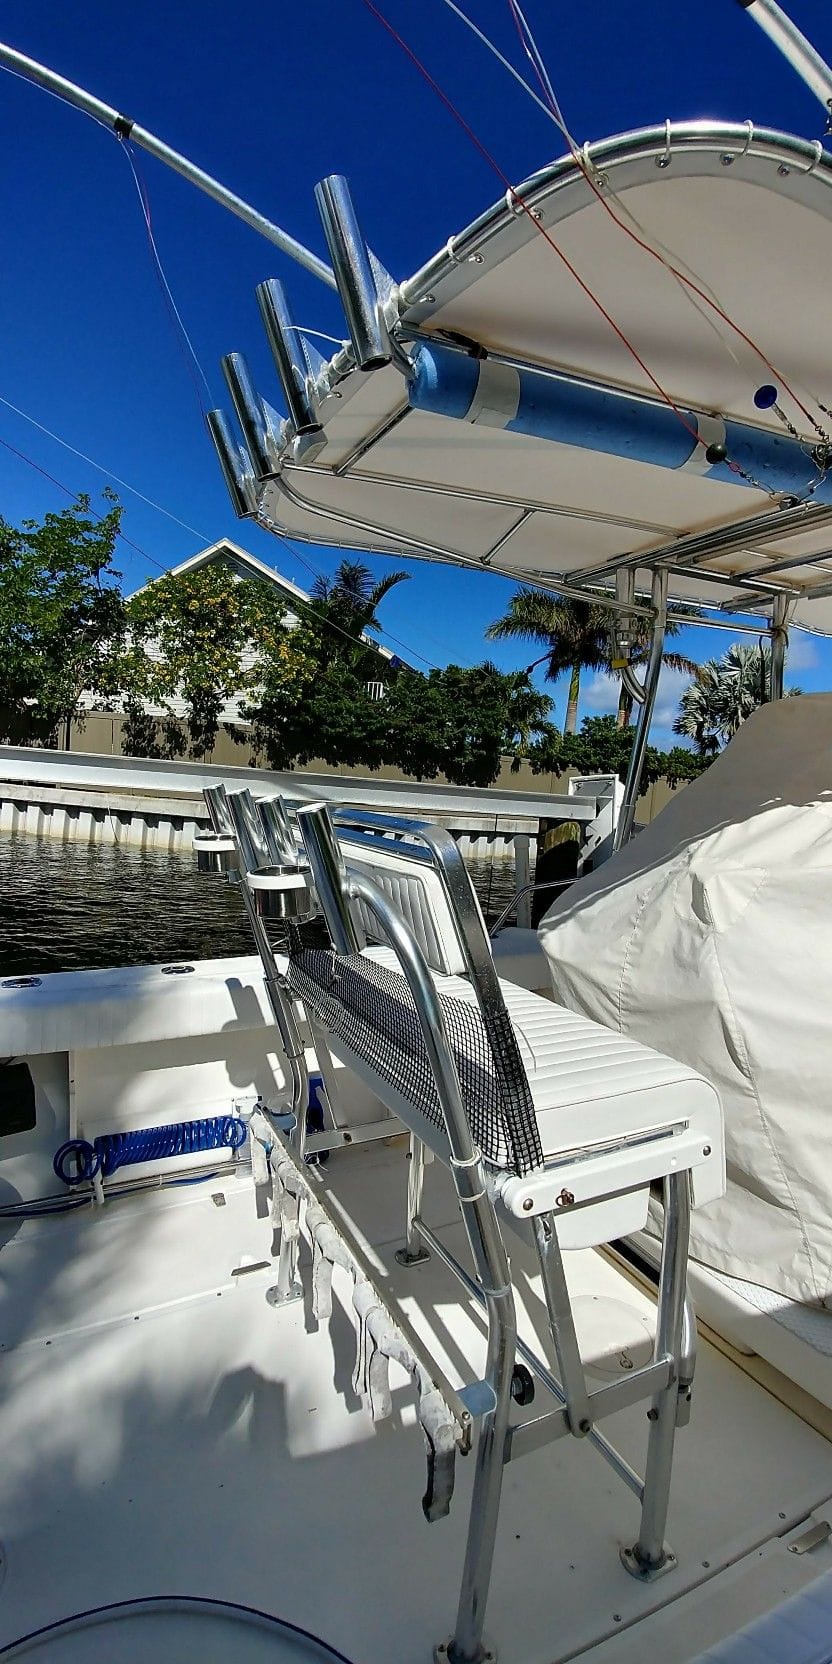 Pedestal seat extension - The Hull Truth - Boating and Fishing Forum